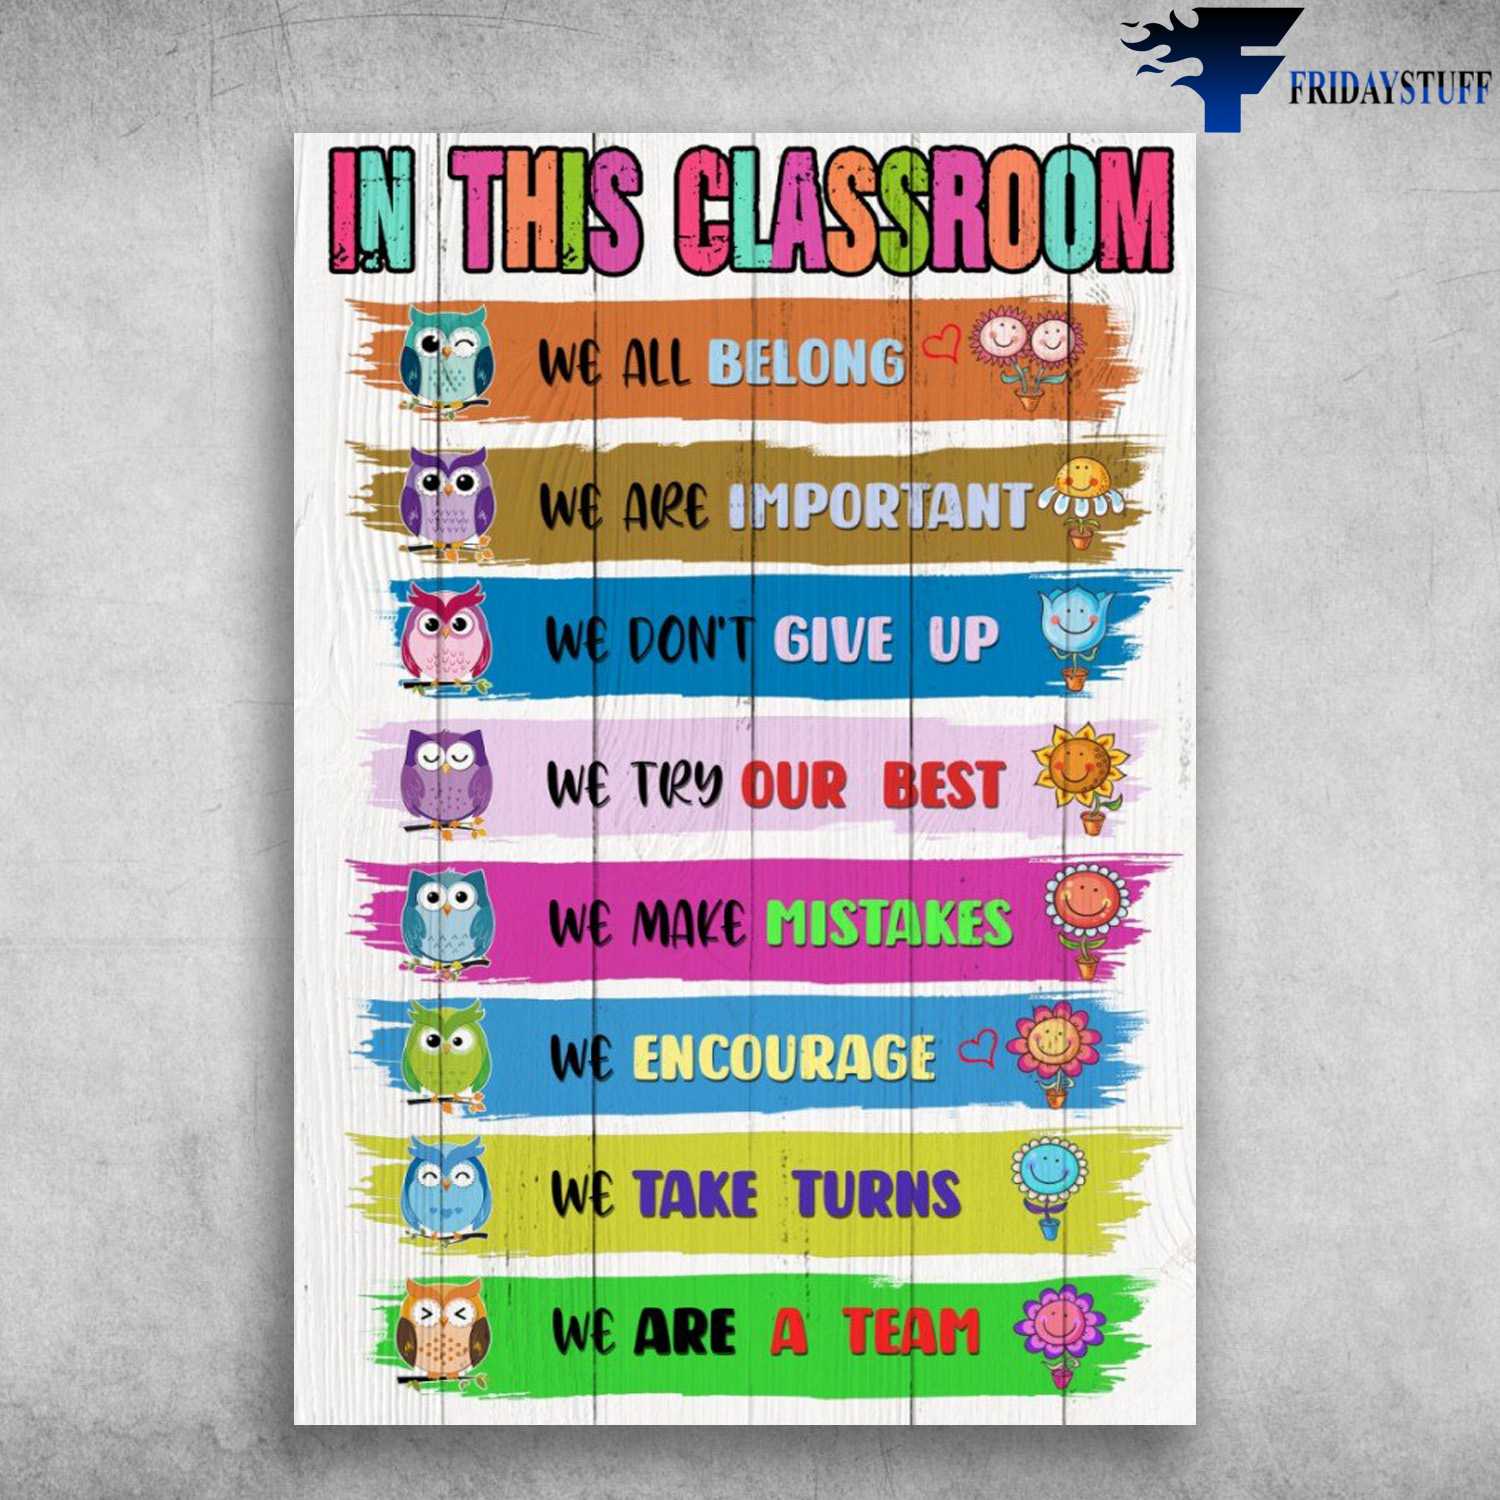 Classroom Rules - In This Classroom, We All Belong, We Are Important, We Don't Give Up, We Try Our Best, We Make Mistakes, We Encourage, We Take Turns, We Are A Team